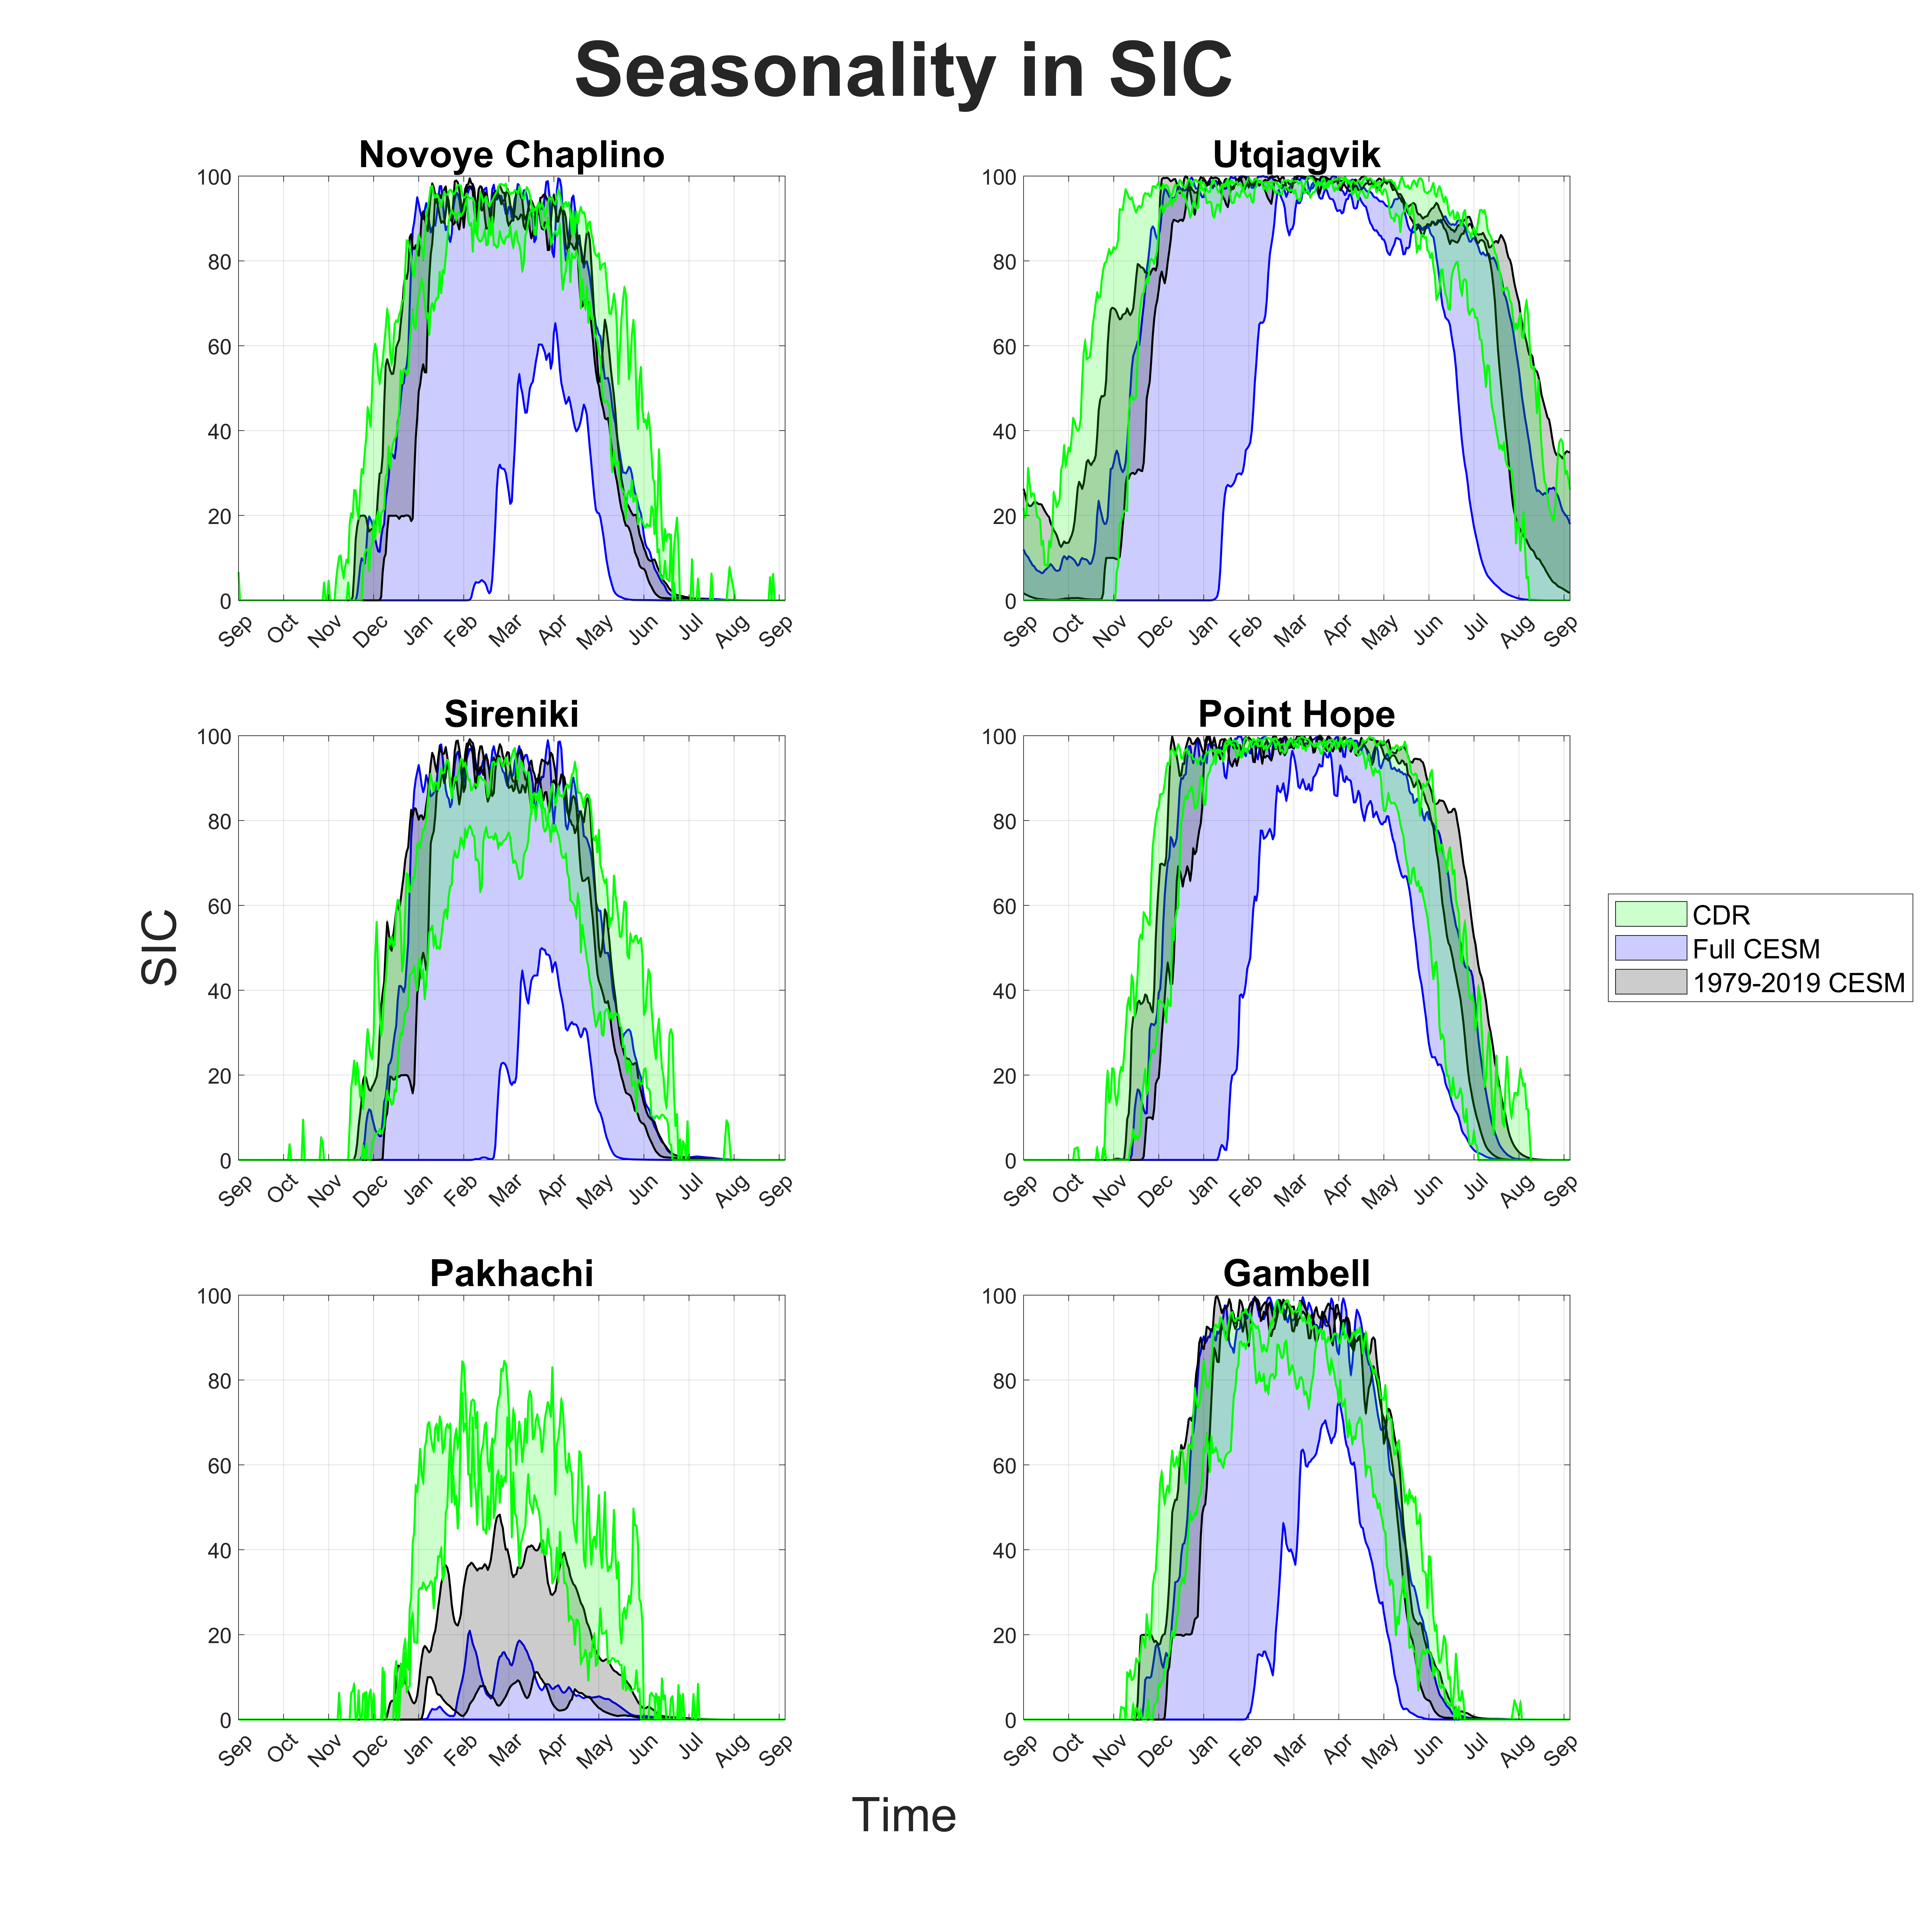 Figure 6. Decadal mean SIC lost between the start and end of each dataset (shaded regions); CDR satellite observations (1979‐88 & 2010‐19, green), and CESM1‐LE simulation (1920‐29 & 2071‐80, blue, and 1979‐88 & 2010‐19, black). The full CESM area does not cover the later 1979‐2019 CESM area for Pakhachi because the first decade of its time series has anomalously low SIC.